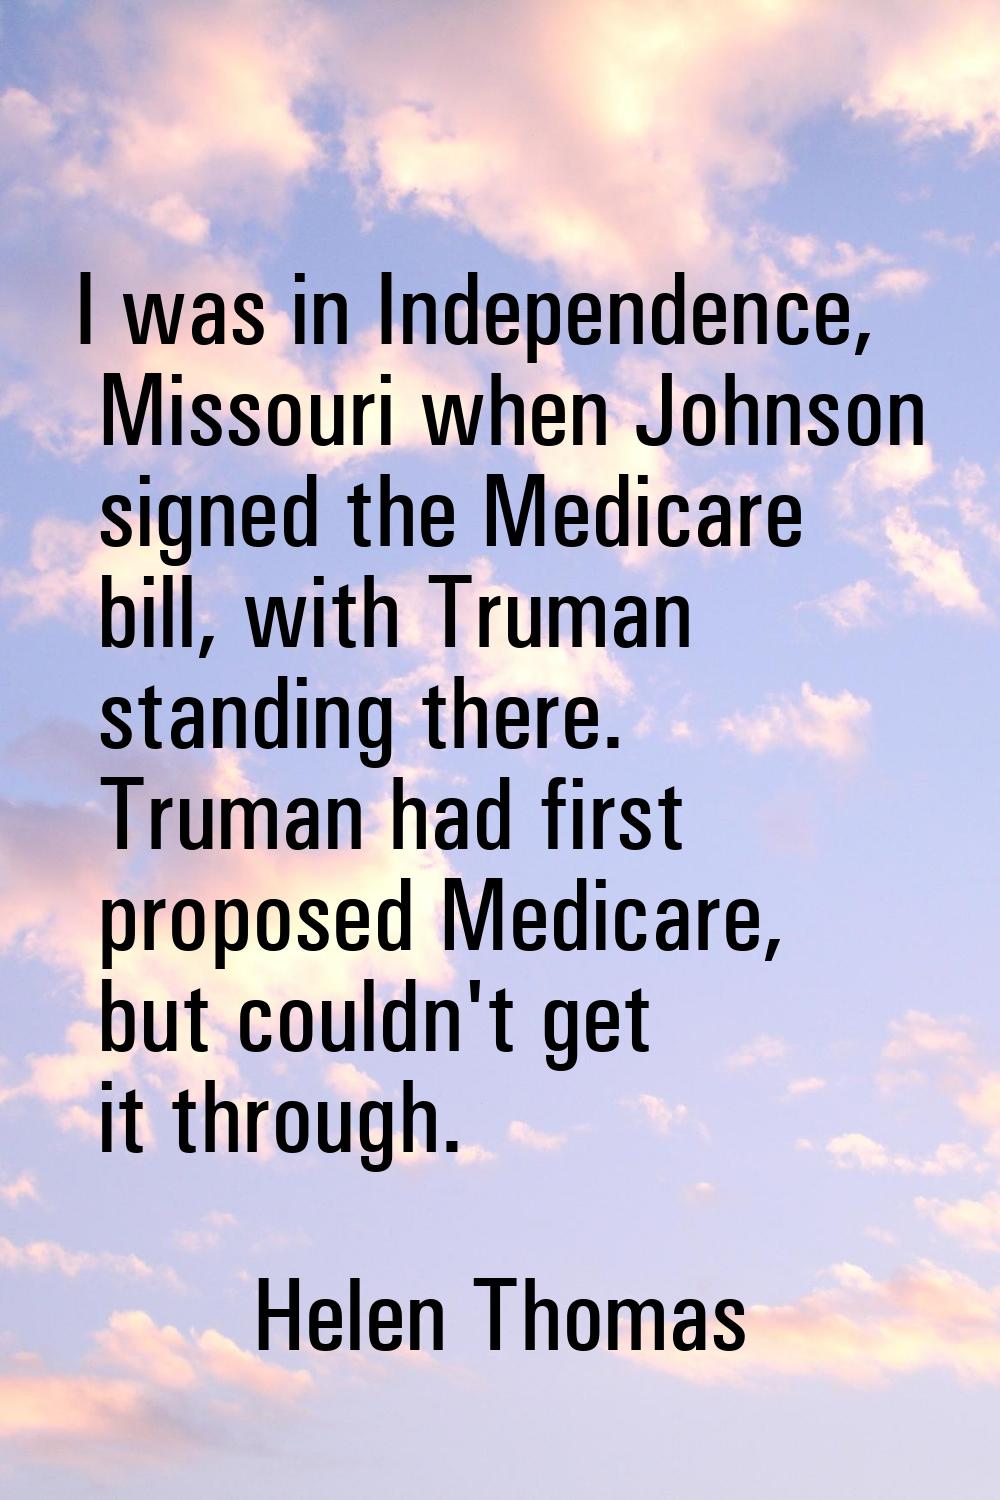 I was in Independence, Missouri when Johnson signed the Medicare bill, with Truman standing there. 